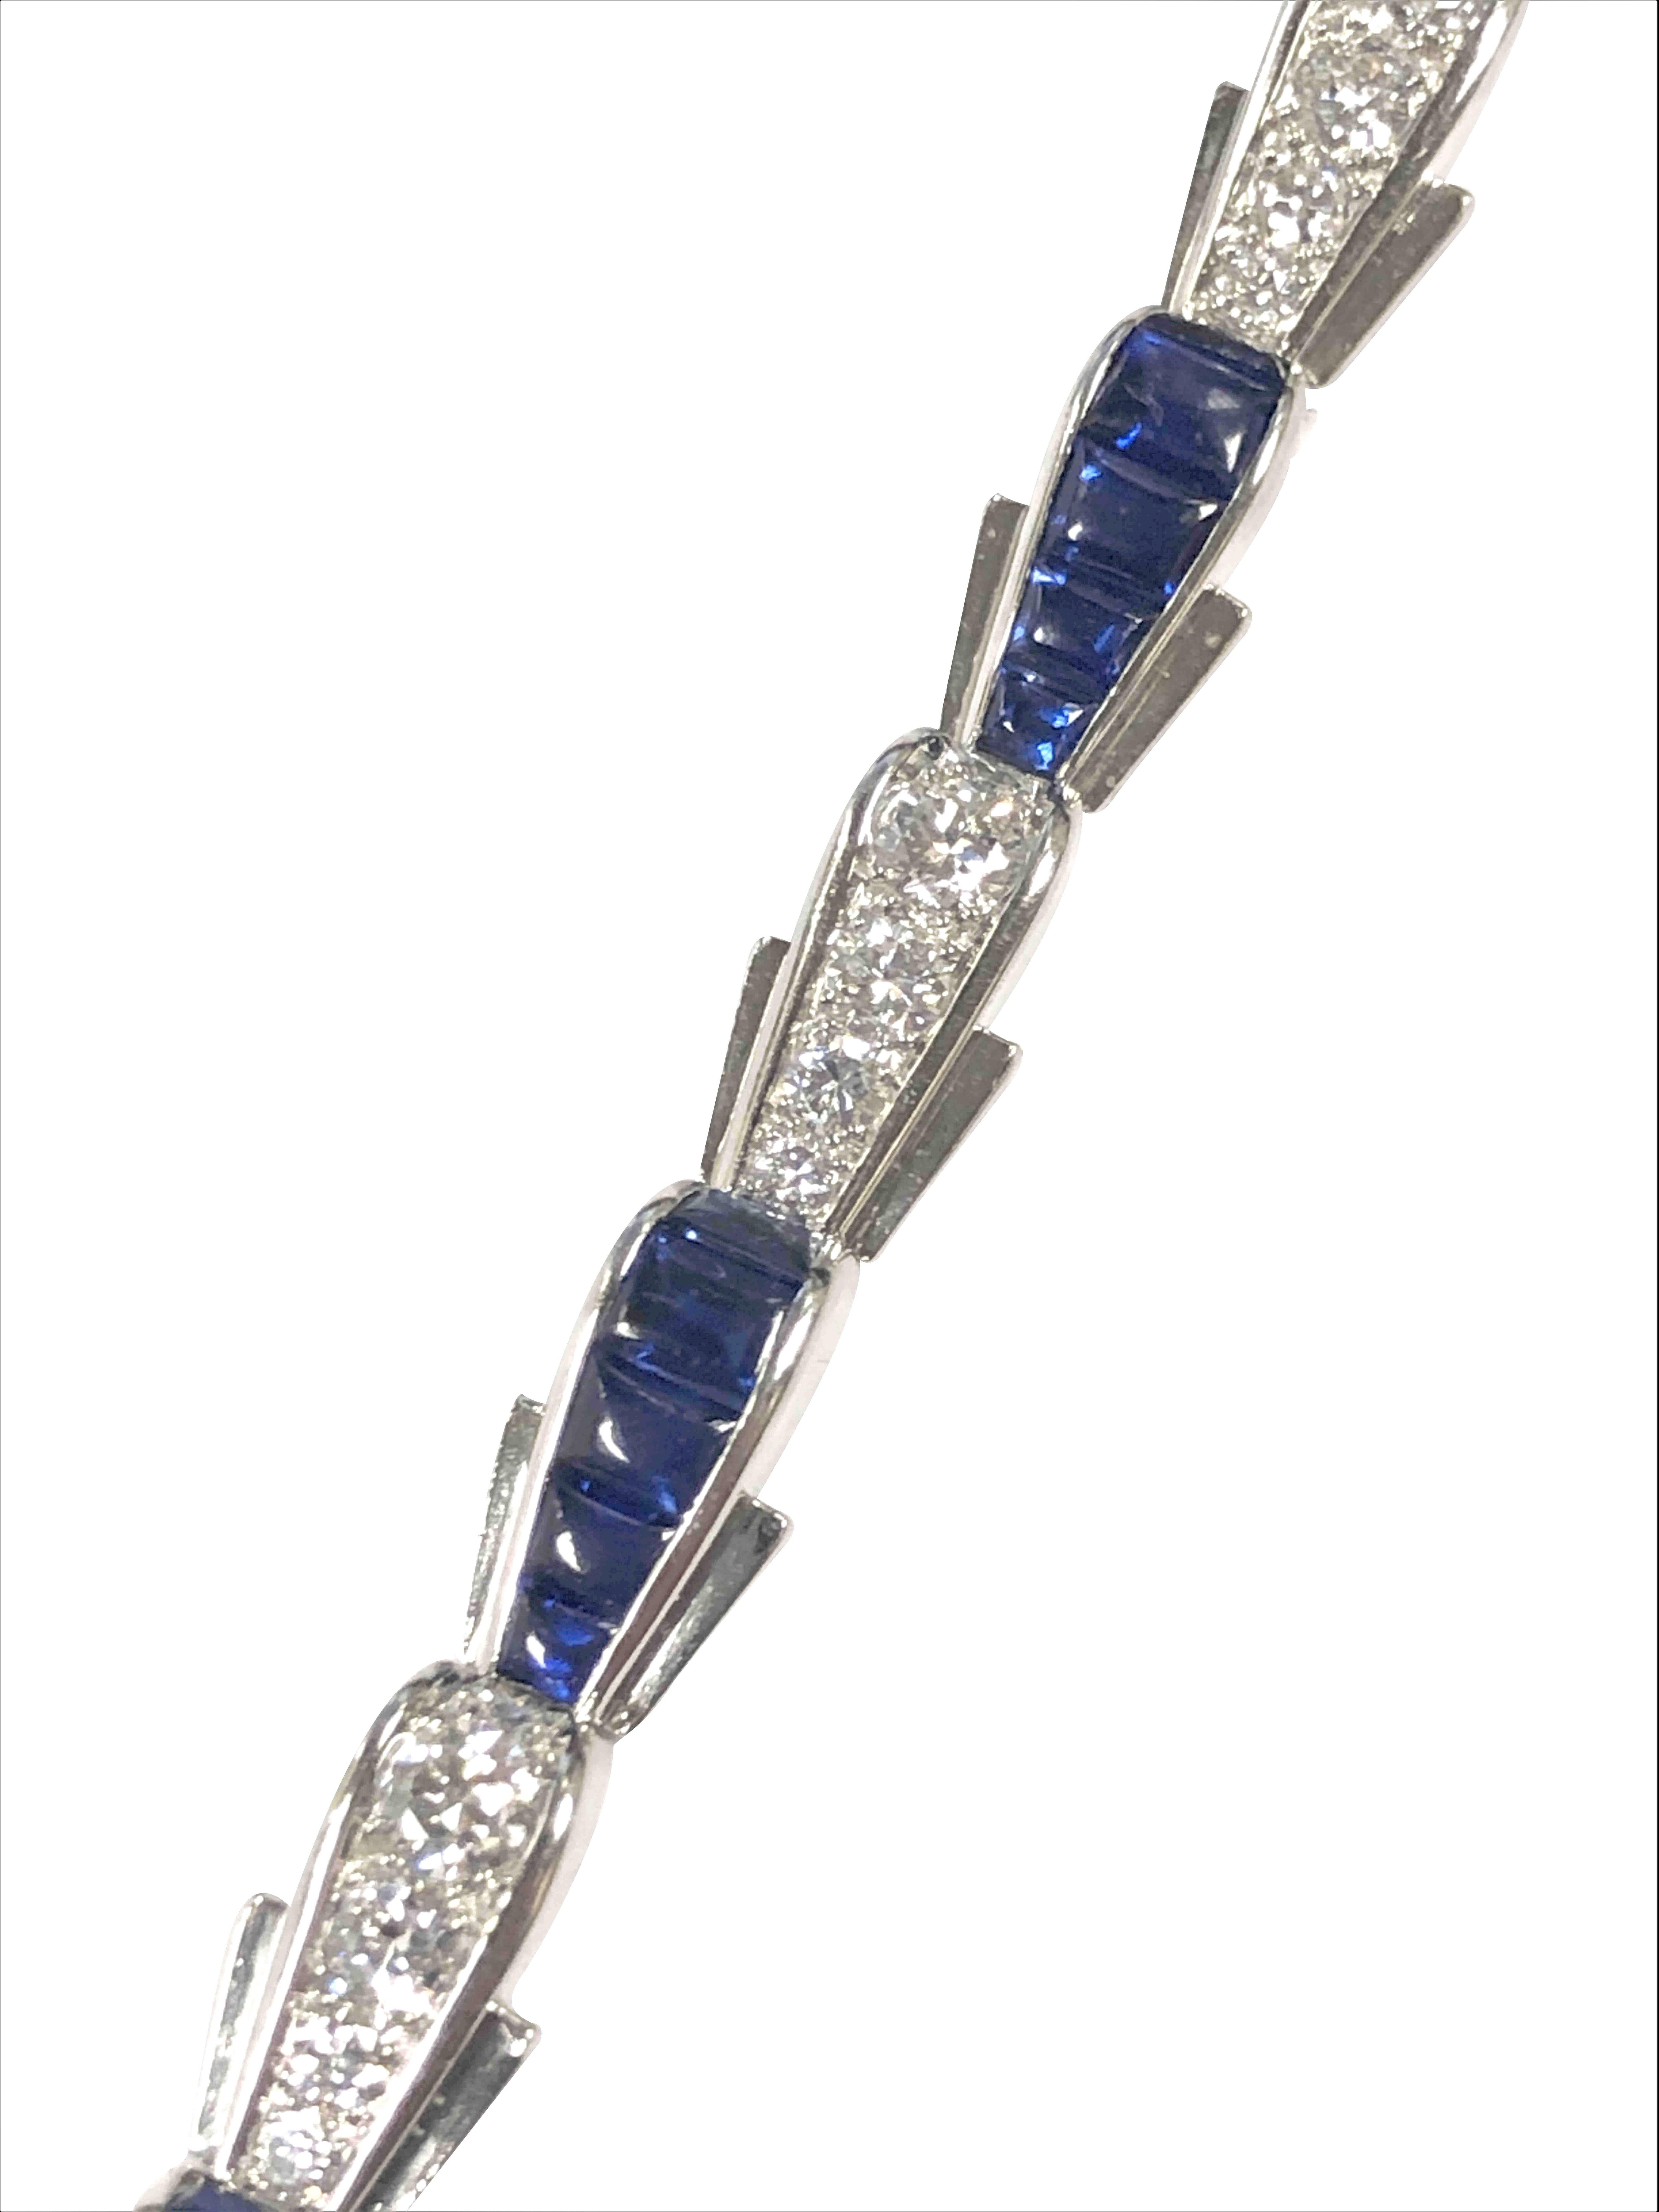 Circa 1930s Charlton & Company Art Deco Bracelet, measuring 5/16 inch wide and 7 inches length, set with Fine White European cut Diamonds totaling 2.50 Carats and further set with Very Fine color Buff cut Sapphires most likely No Heat and Burmese in